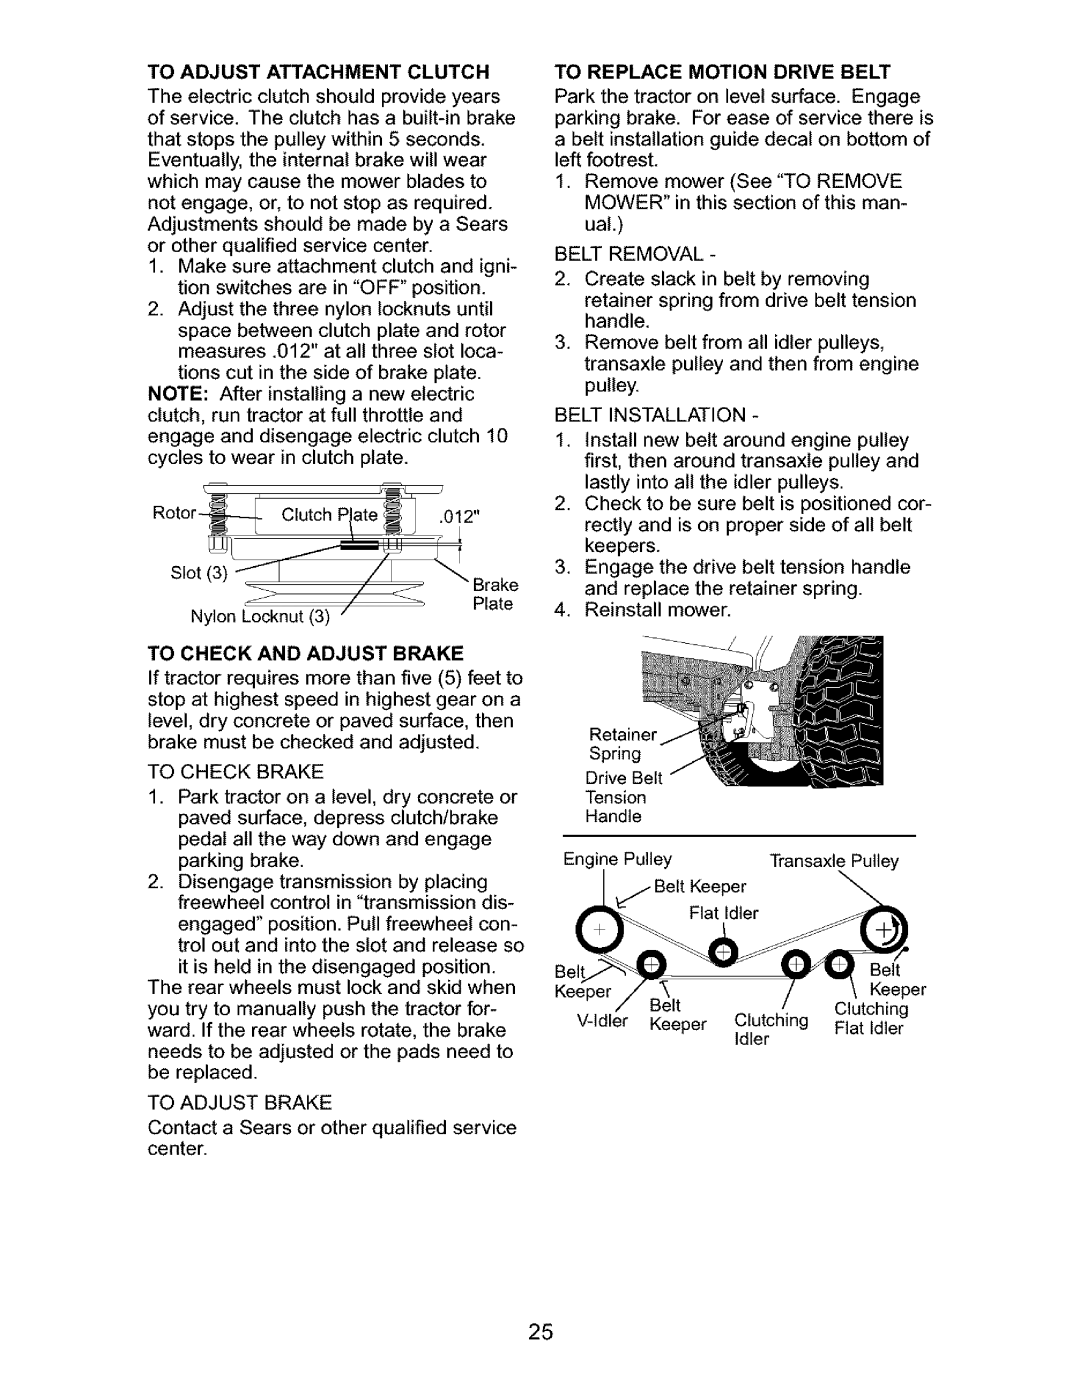 Craftsman 917.27632 owner manual To Adjust Attachment Clutch 